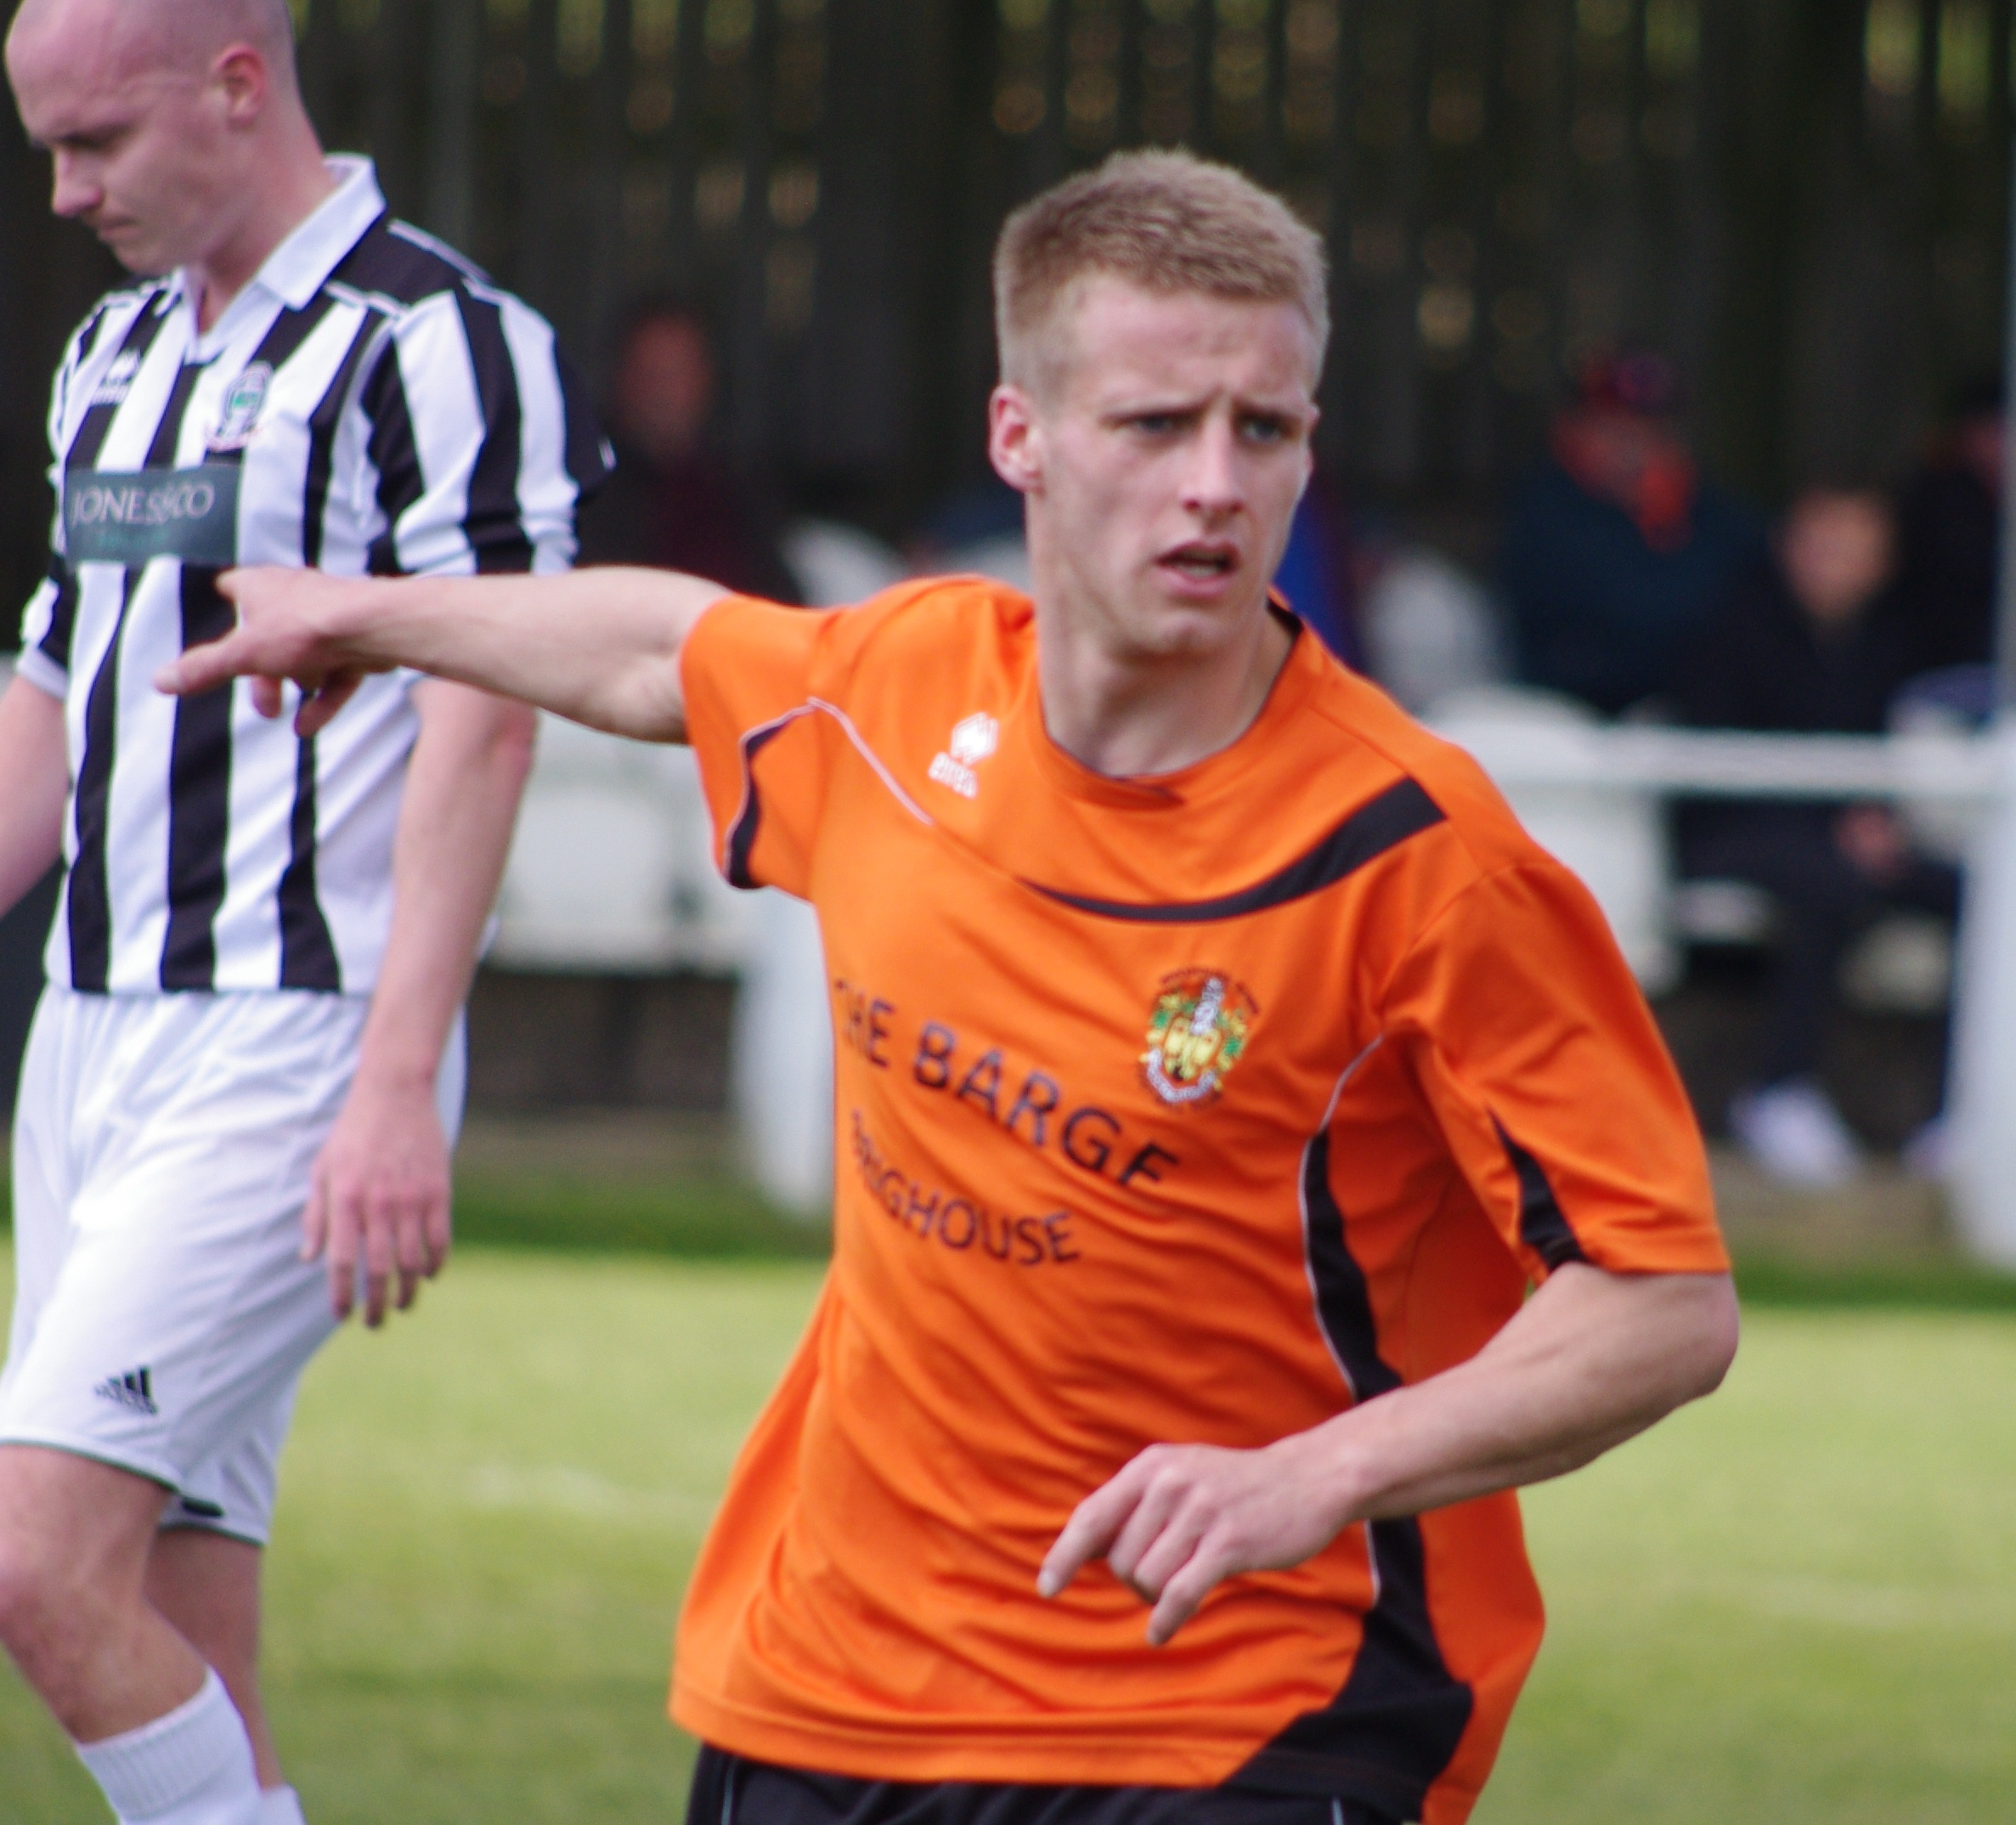 Sports Performer Player of the Season - Brighouse Town winger Ryan Hall